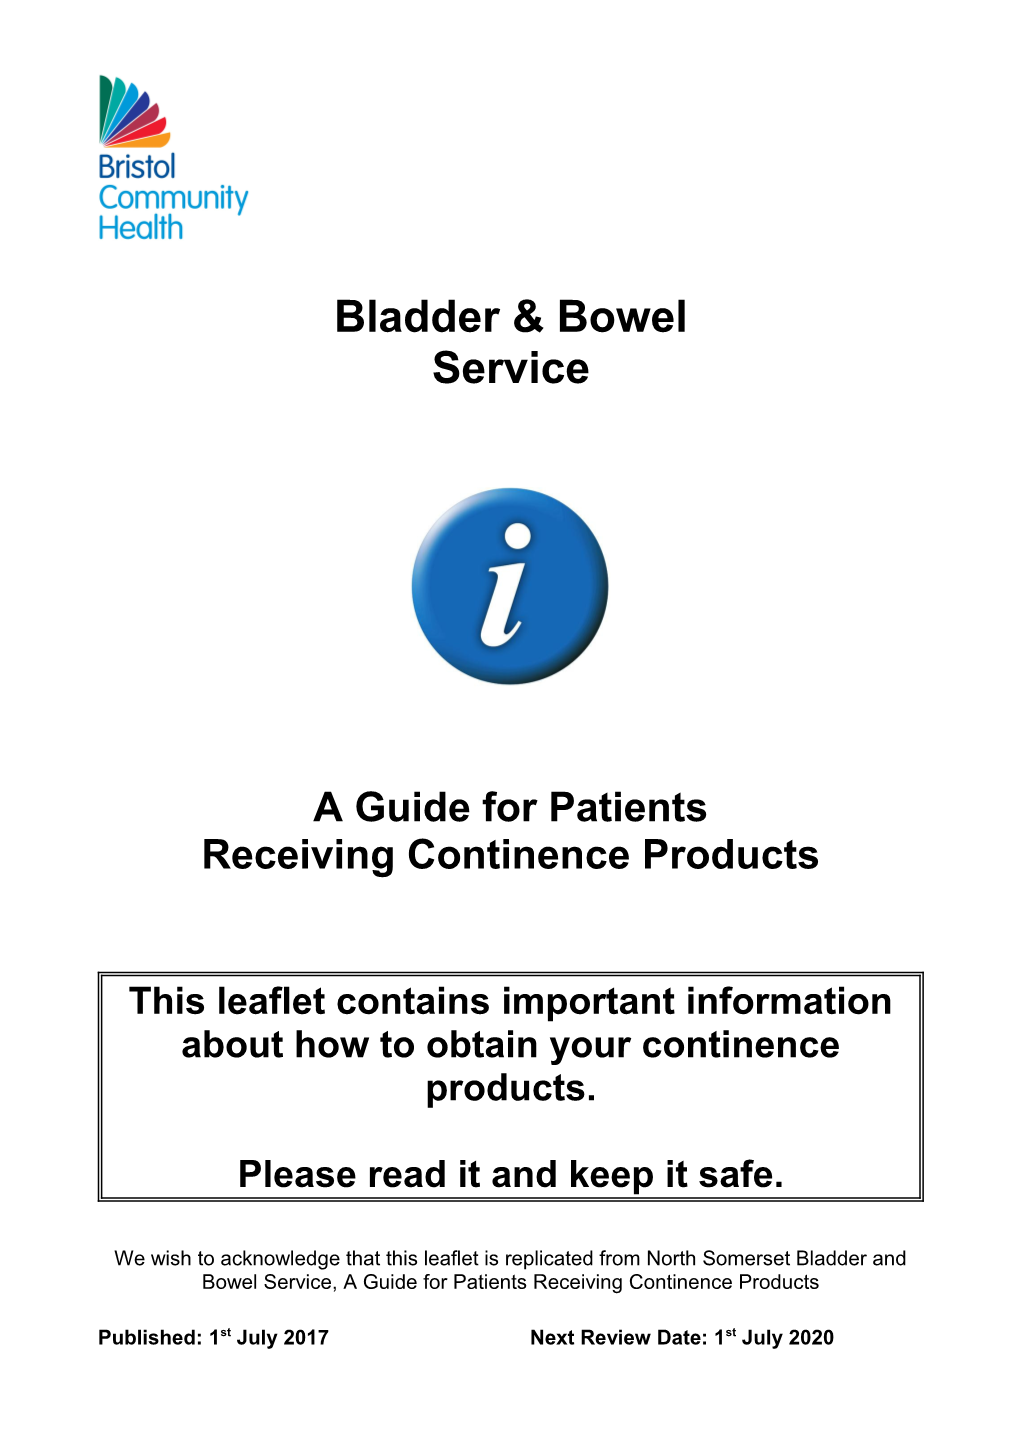 This Leaflet Contains Important Information About How to Obtain Your Continence Products